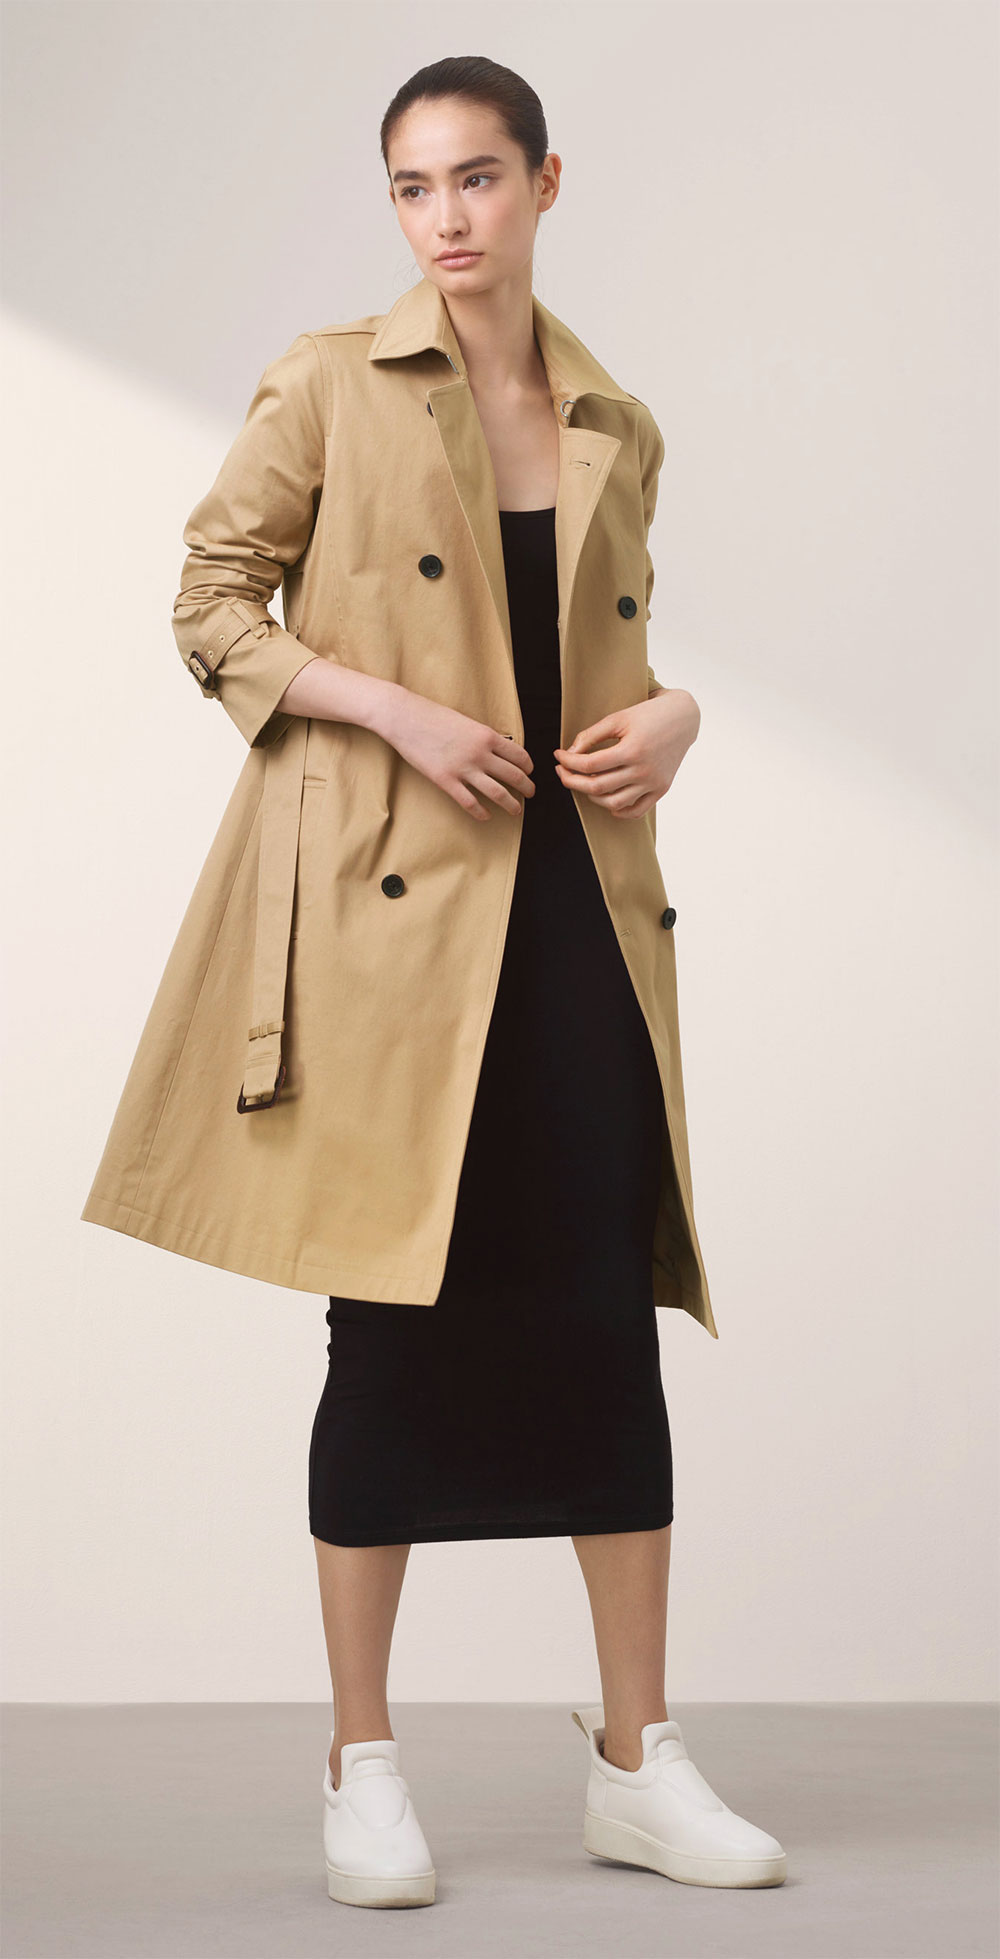 trench coat daily outfit